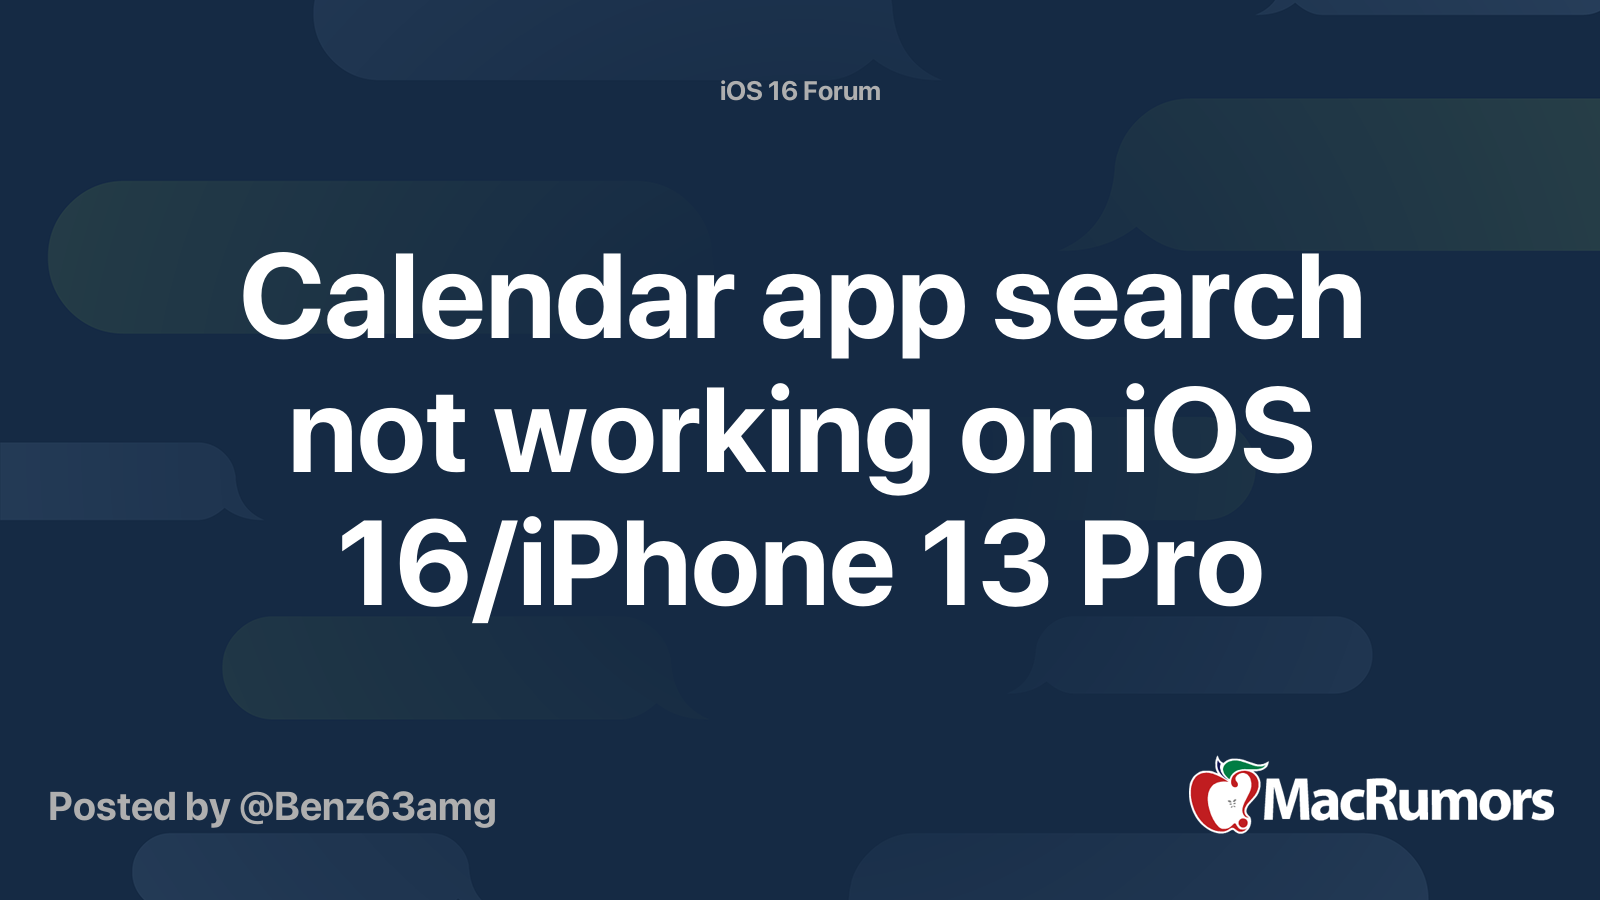 Calendar app search not engaged on iOS 16/iPhone 13 Professional